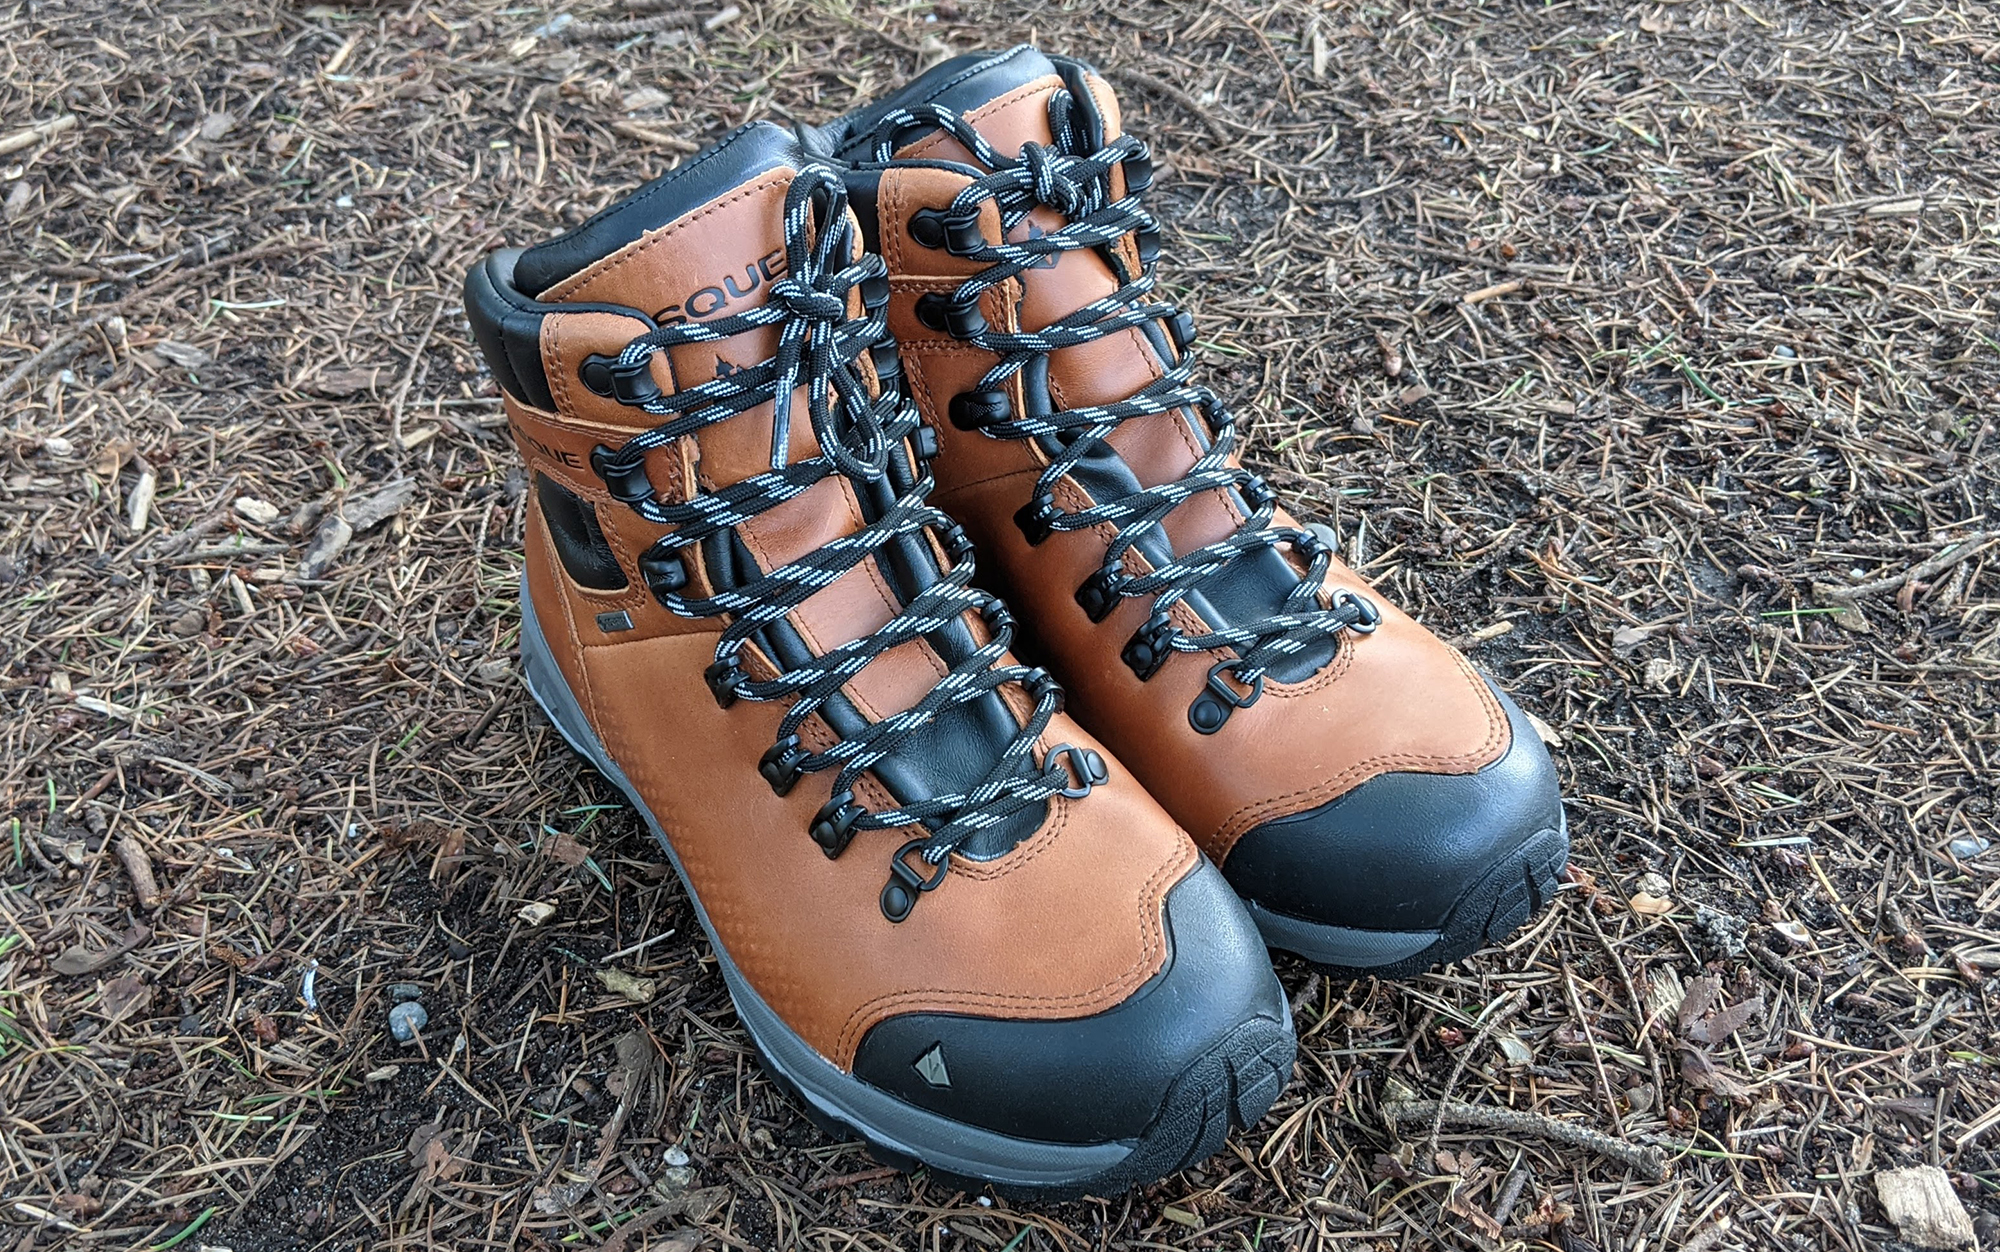 The Vasque St. Elias is one of the best waterproof hiking boots.